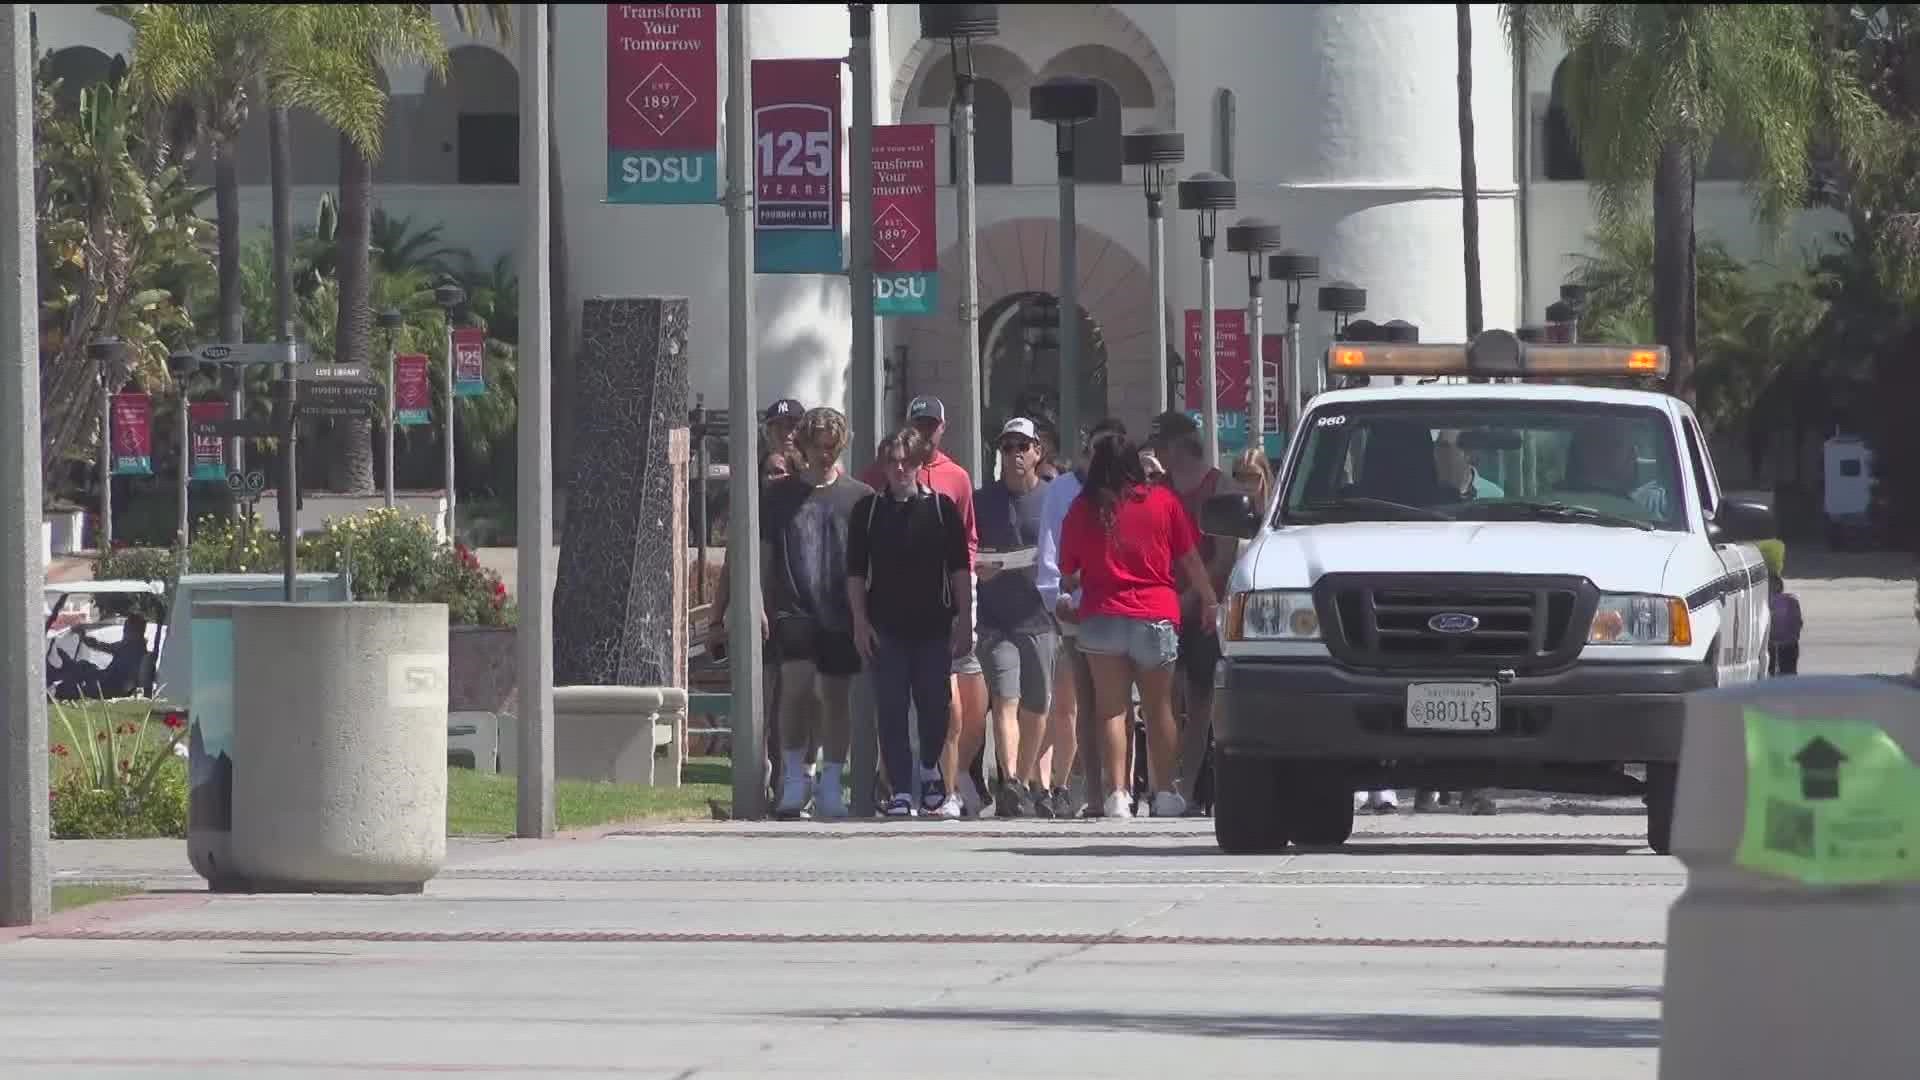 It has been one year since the alleged gang rape of a 17-year-old, high-school senior by several San Diego State University football players at an off-campus party.